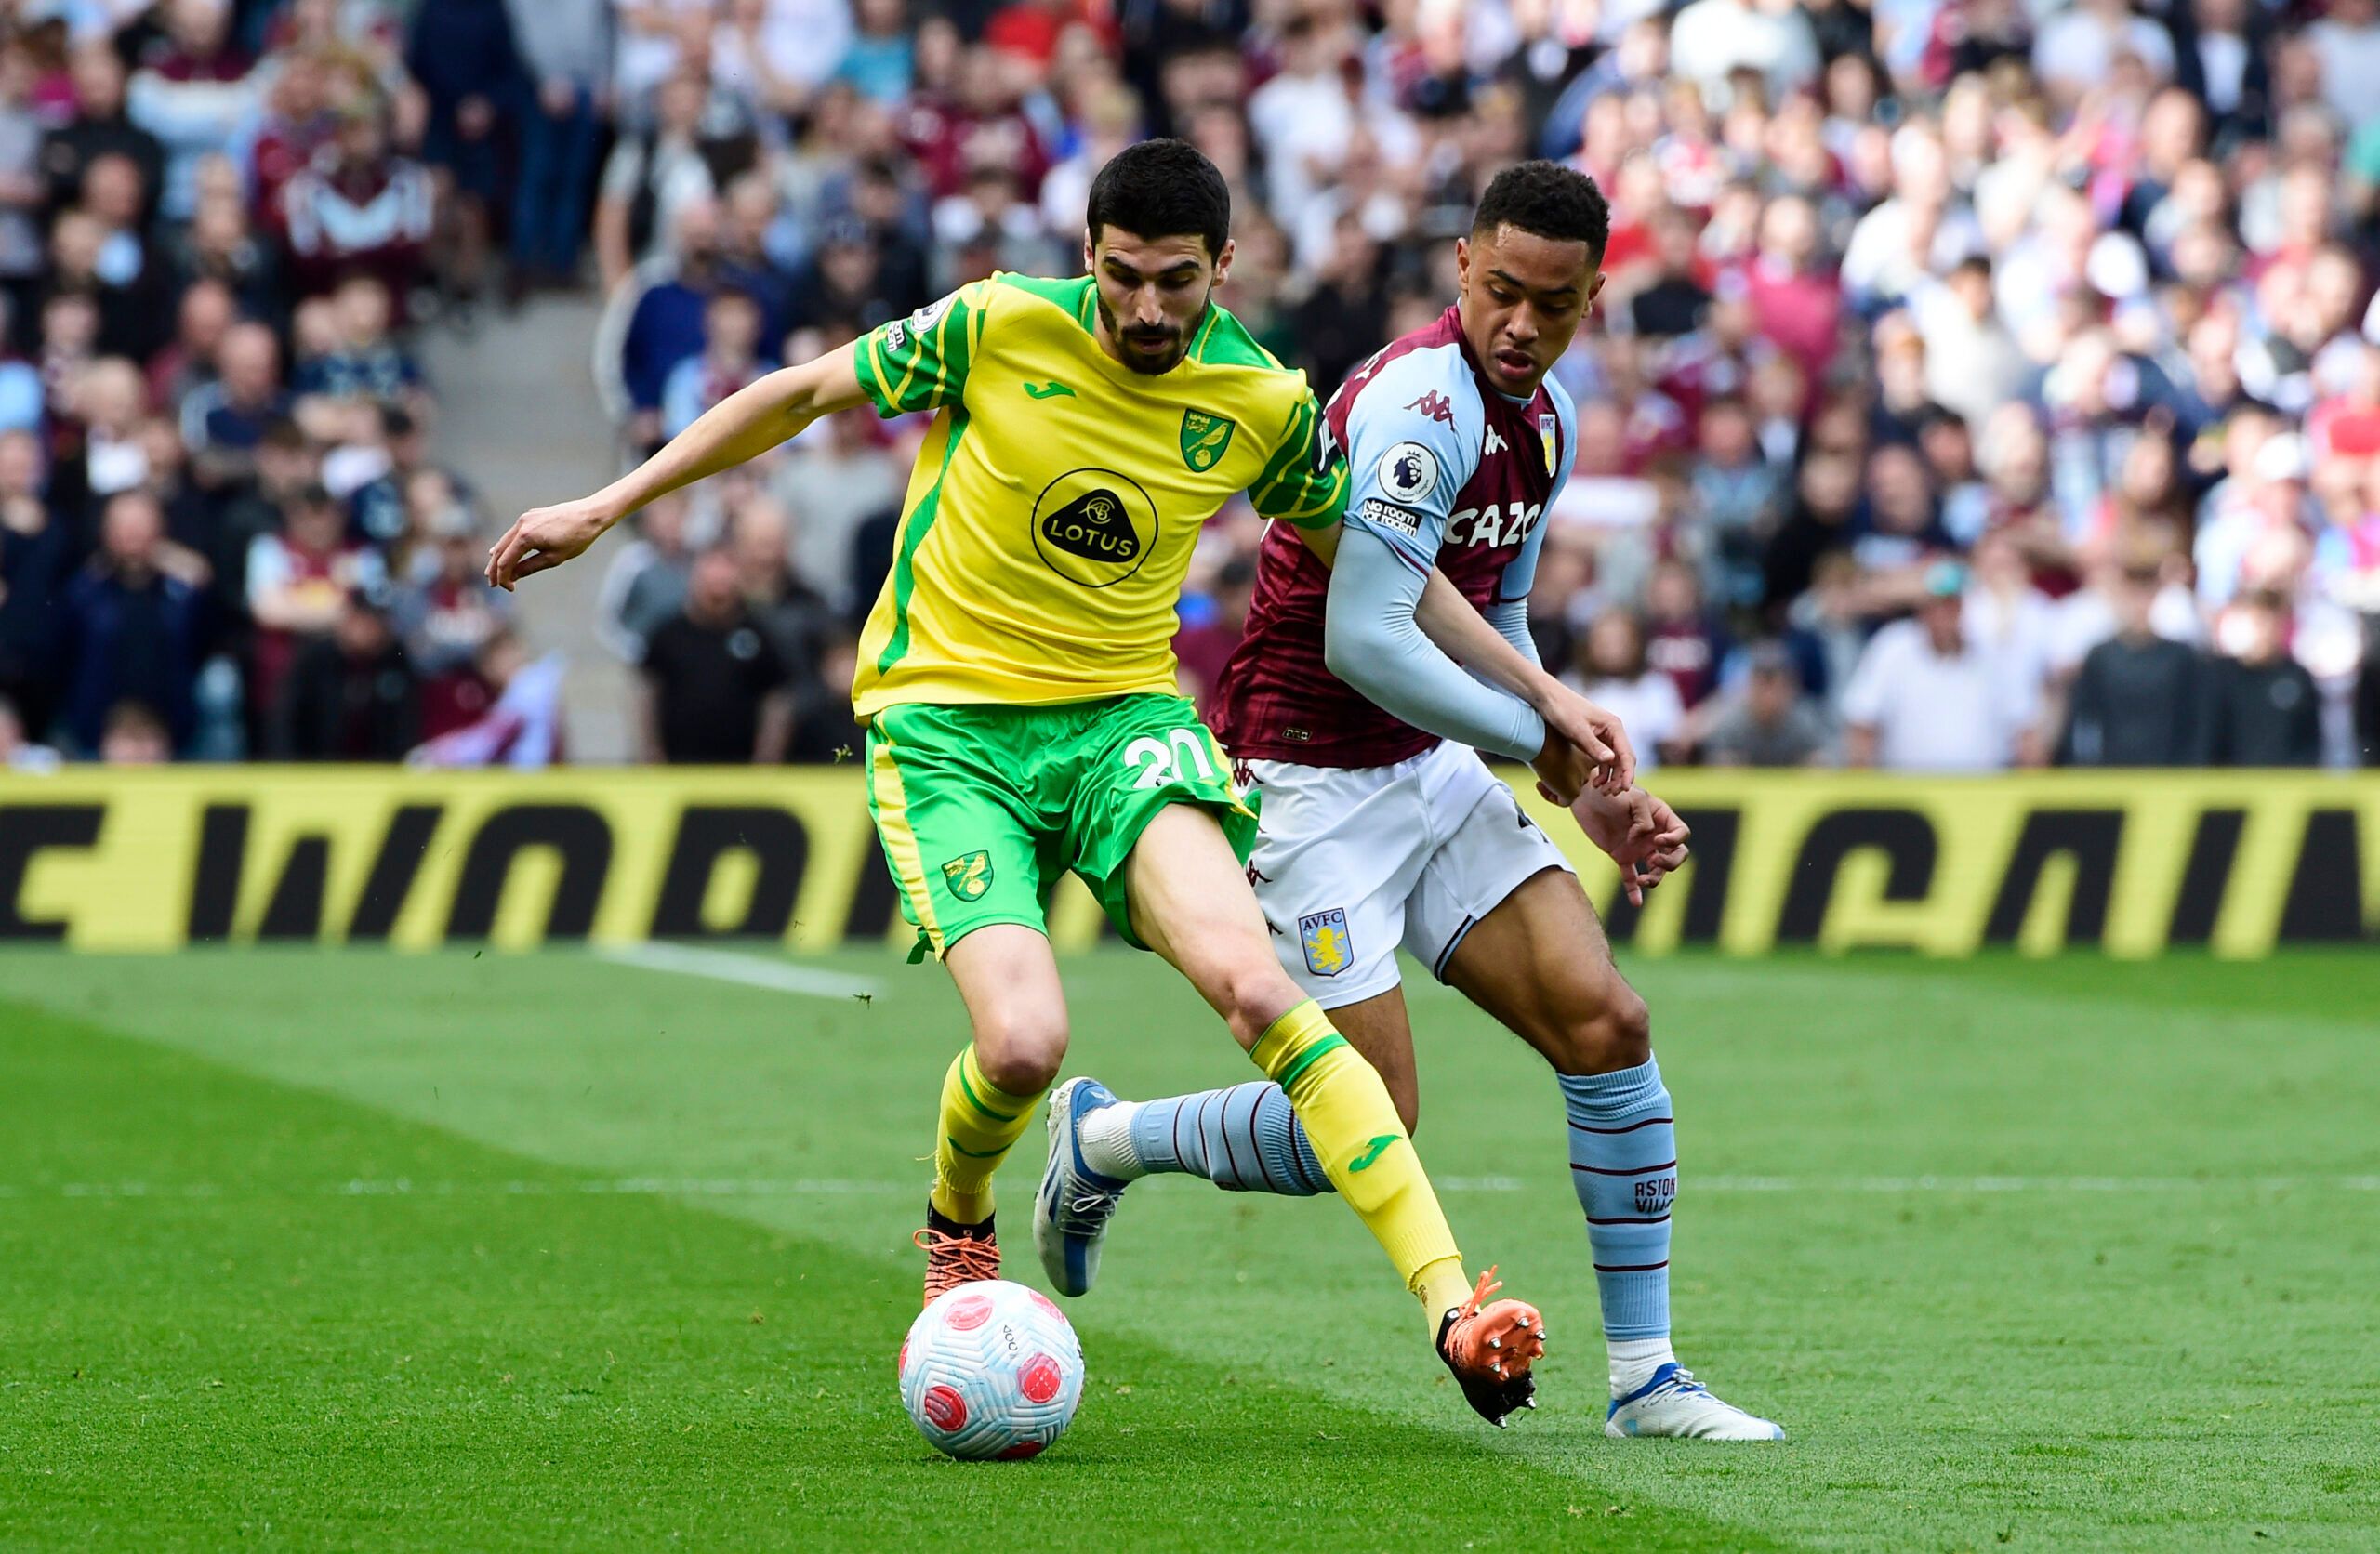 Soccer Football - Premier League - Aston Villa v Norwich City - Villa Park, Birmingham, Britain - April 30, 2022 Norwich City's Pierre Lees-Melou in action with Aston Villa's Jacob Ramsey REUTERS/Rebecca Naden EDITORIAL USE ONLY. No use with unauthorized audio, video, data, fixture lists, club/league logos or 'live' services. Online in-match use limited to 75 images, no video emulation. No use in betting, games or single club /league/player publications.  Please contact your account representati